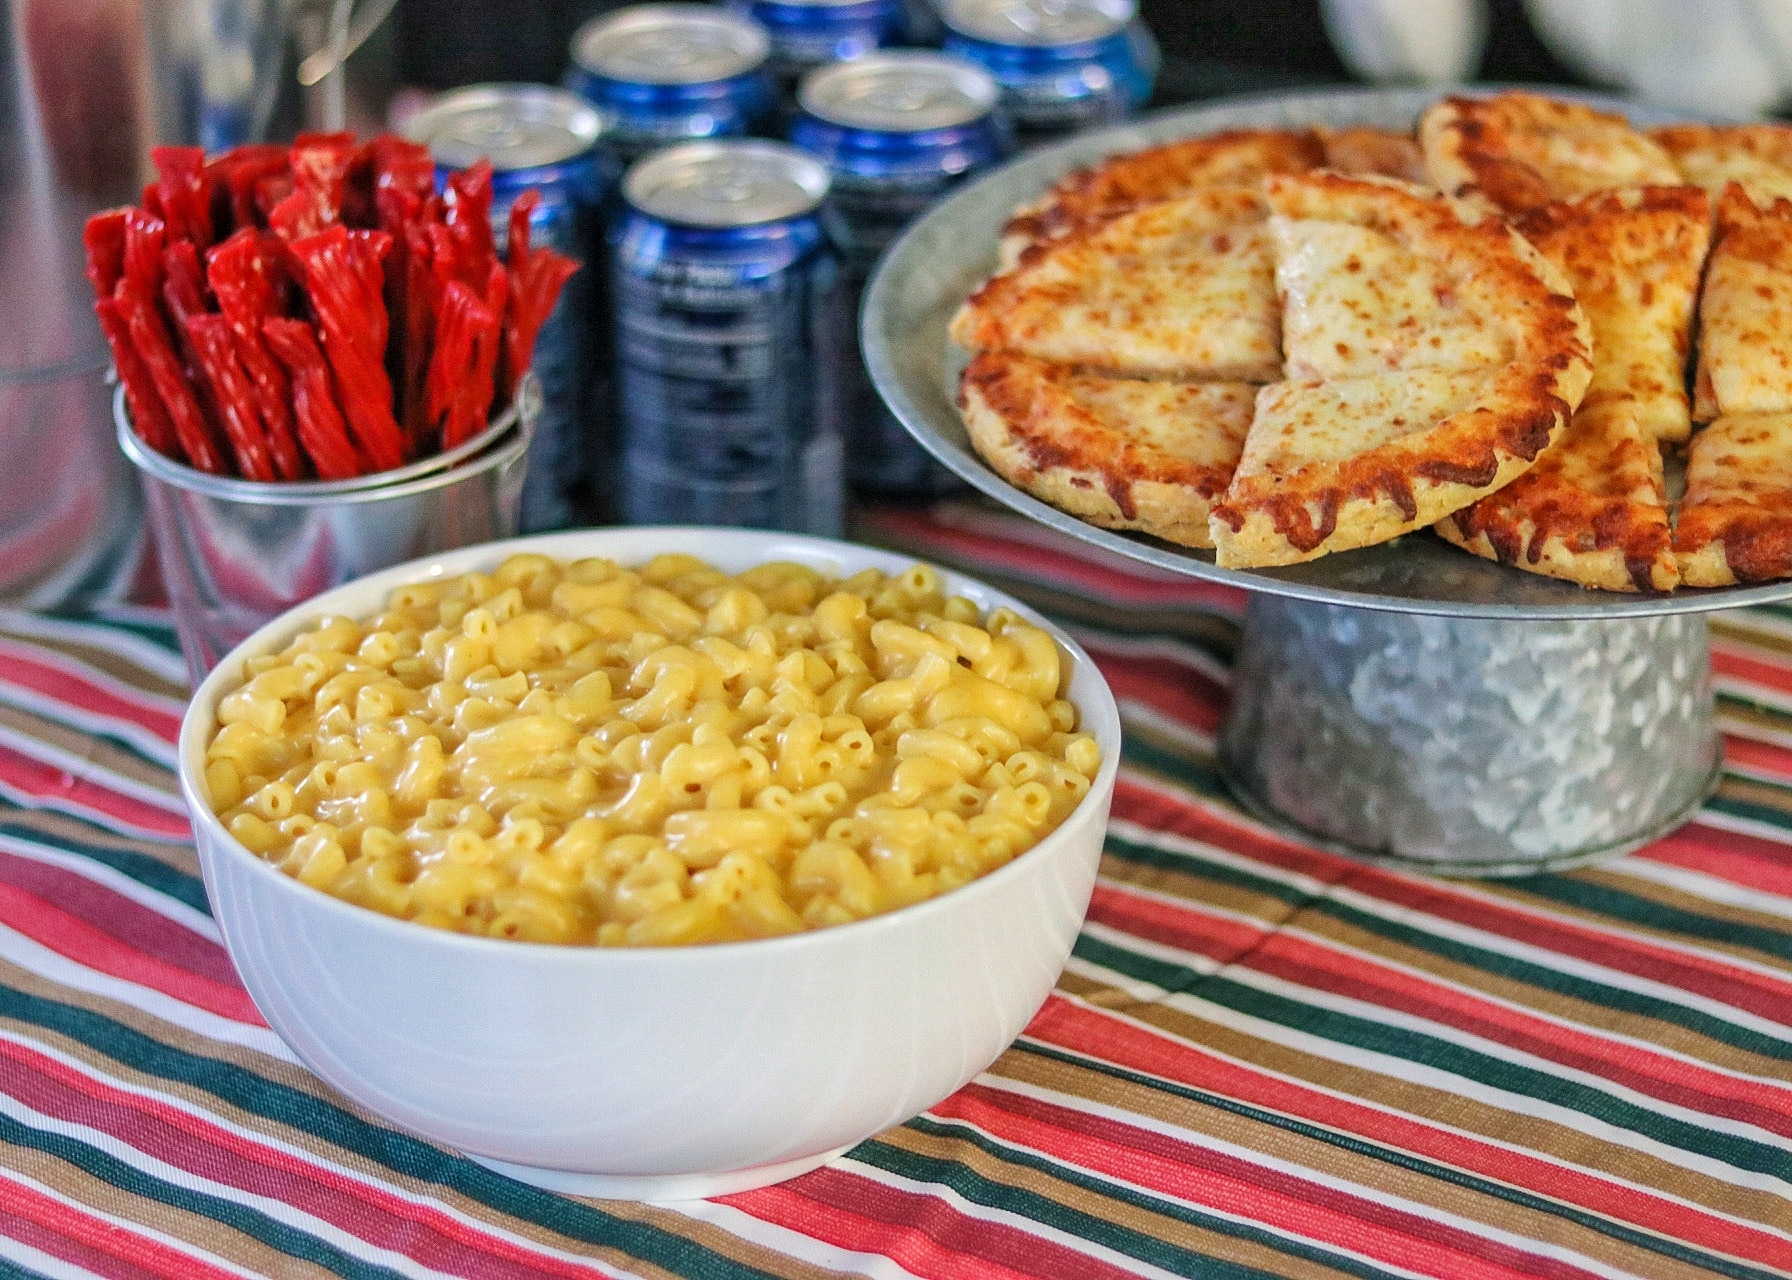 Home Alone party ideas: Home Alone themed food 